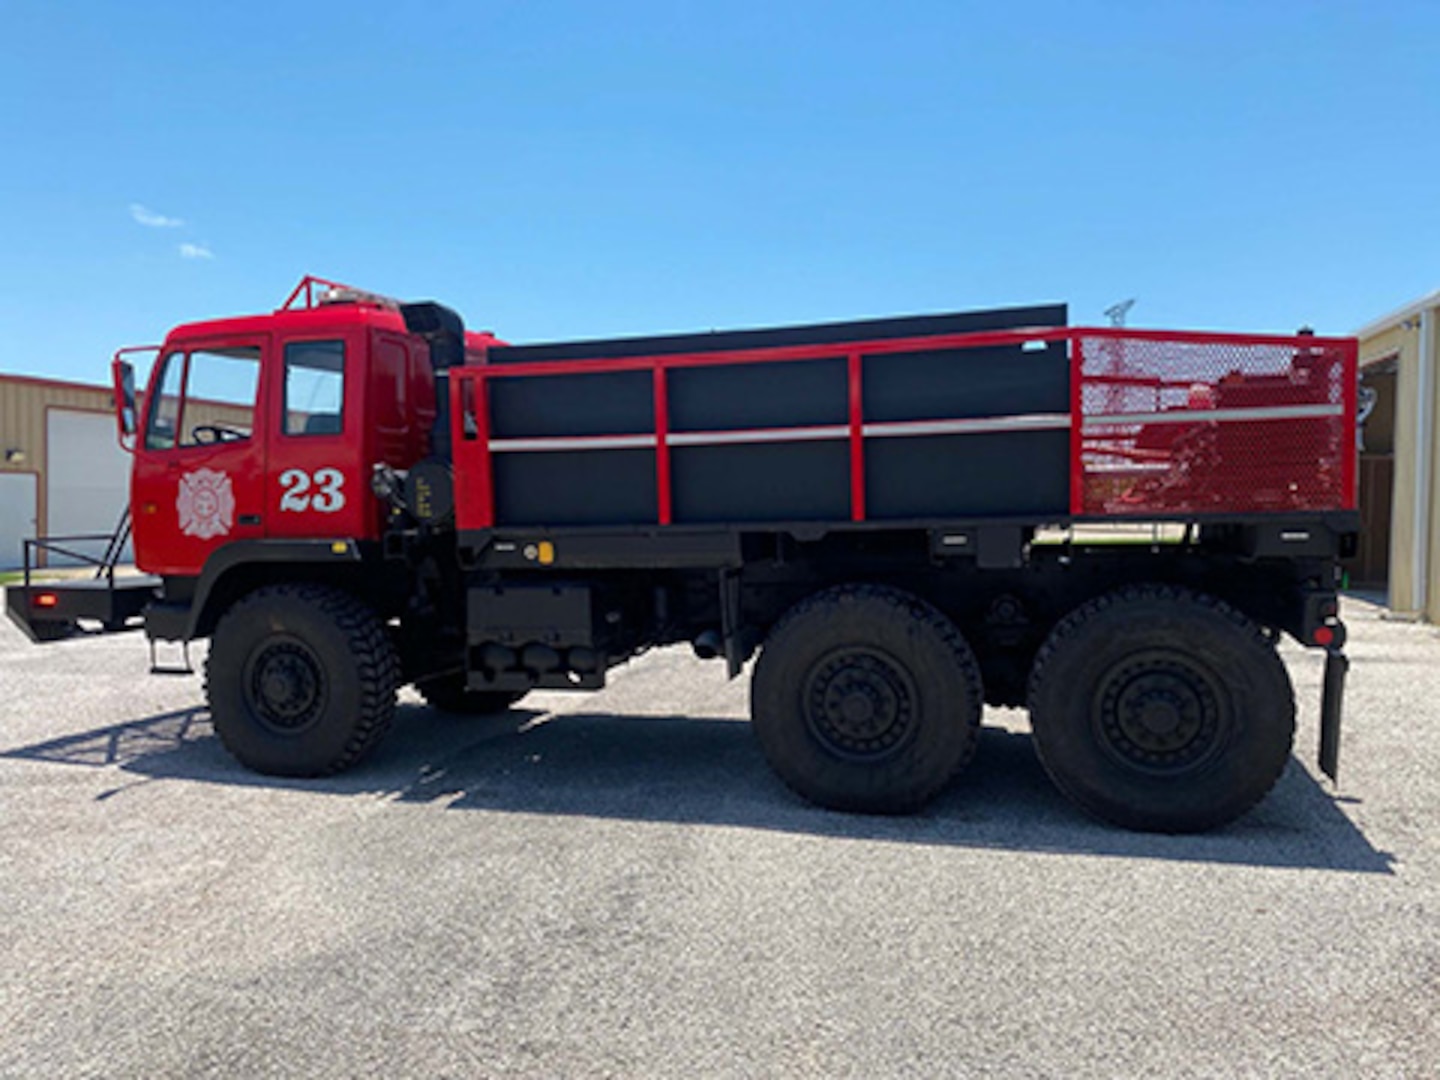 A former military truck is show with a new red paint job and now looking like a fire truck.